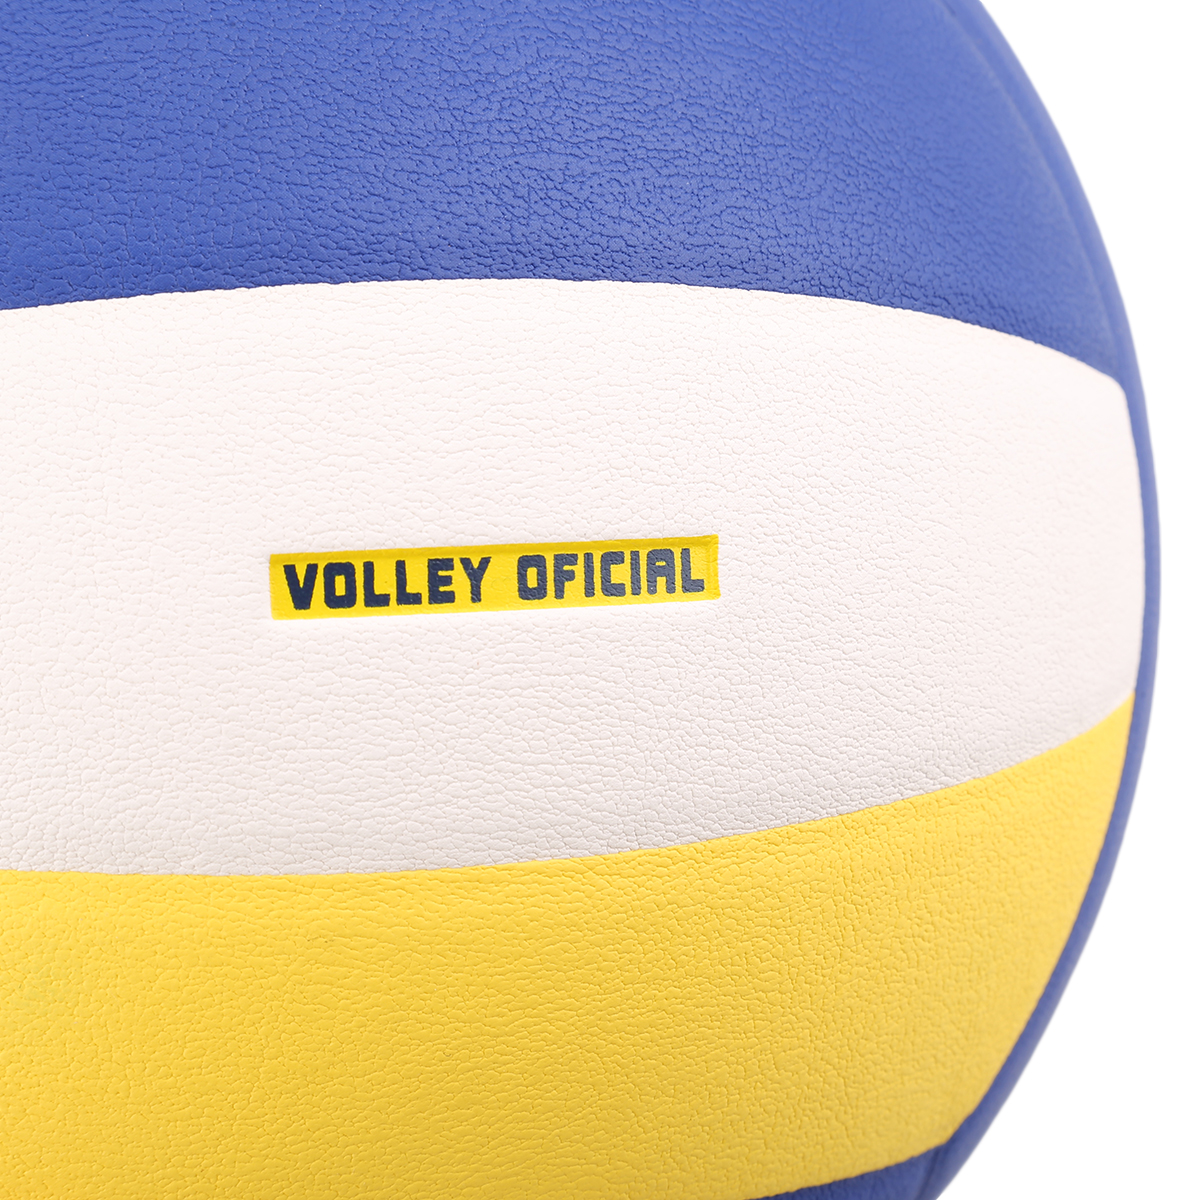 Pelota Dribbling Soft Touch 5.0 Pro,  image number null